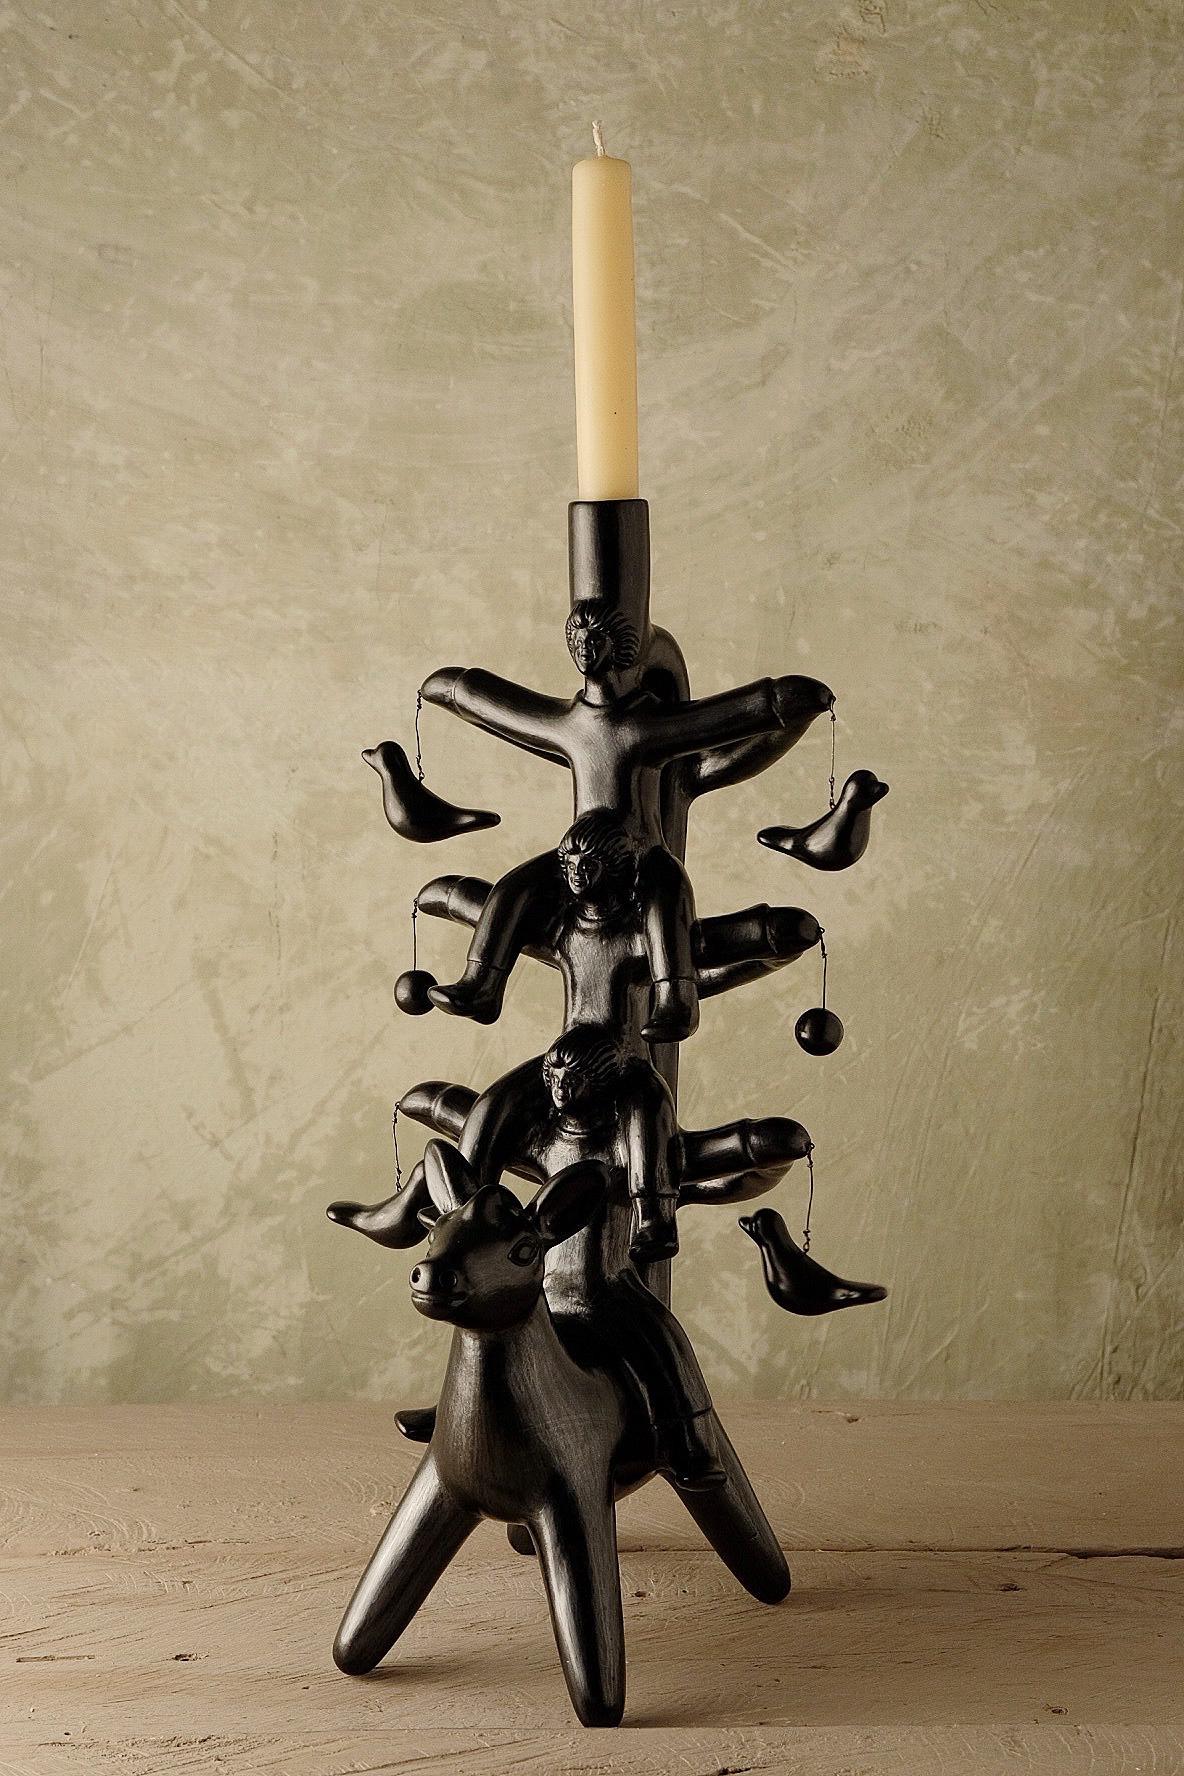 Acatlán candleholder by Onora
Dimensions: W 20 x D 15 x H 40 cm
Materials: Clay

Available in black, white and taupe Hand sculpted clay, covered with a mineral based slip and burnished using a quartz stone. The “Circo Collection” is a